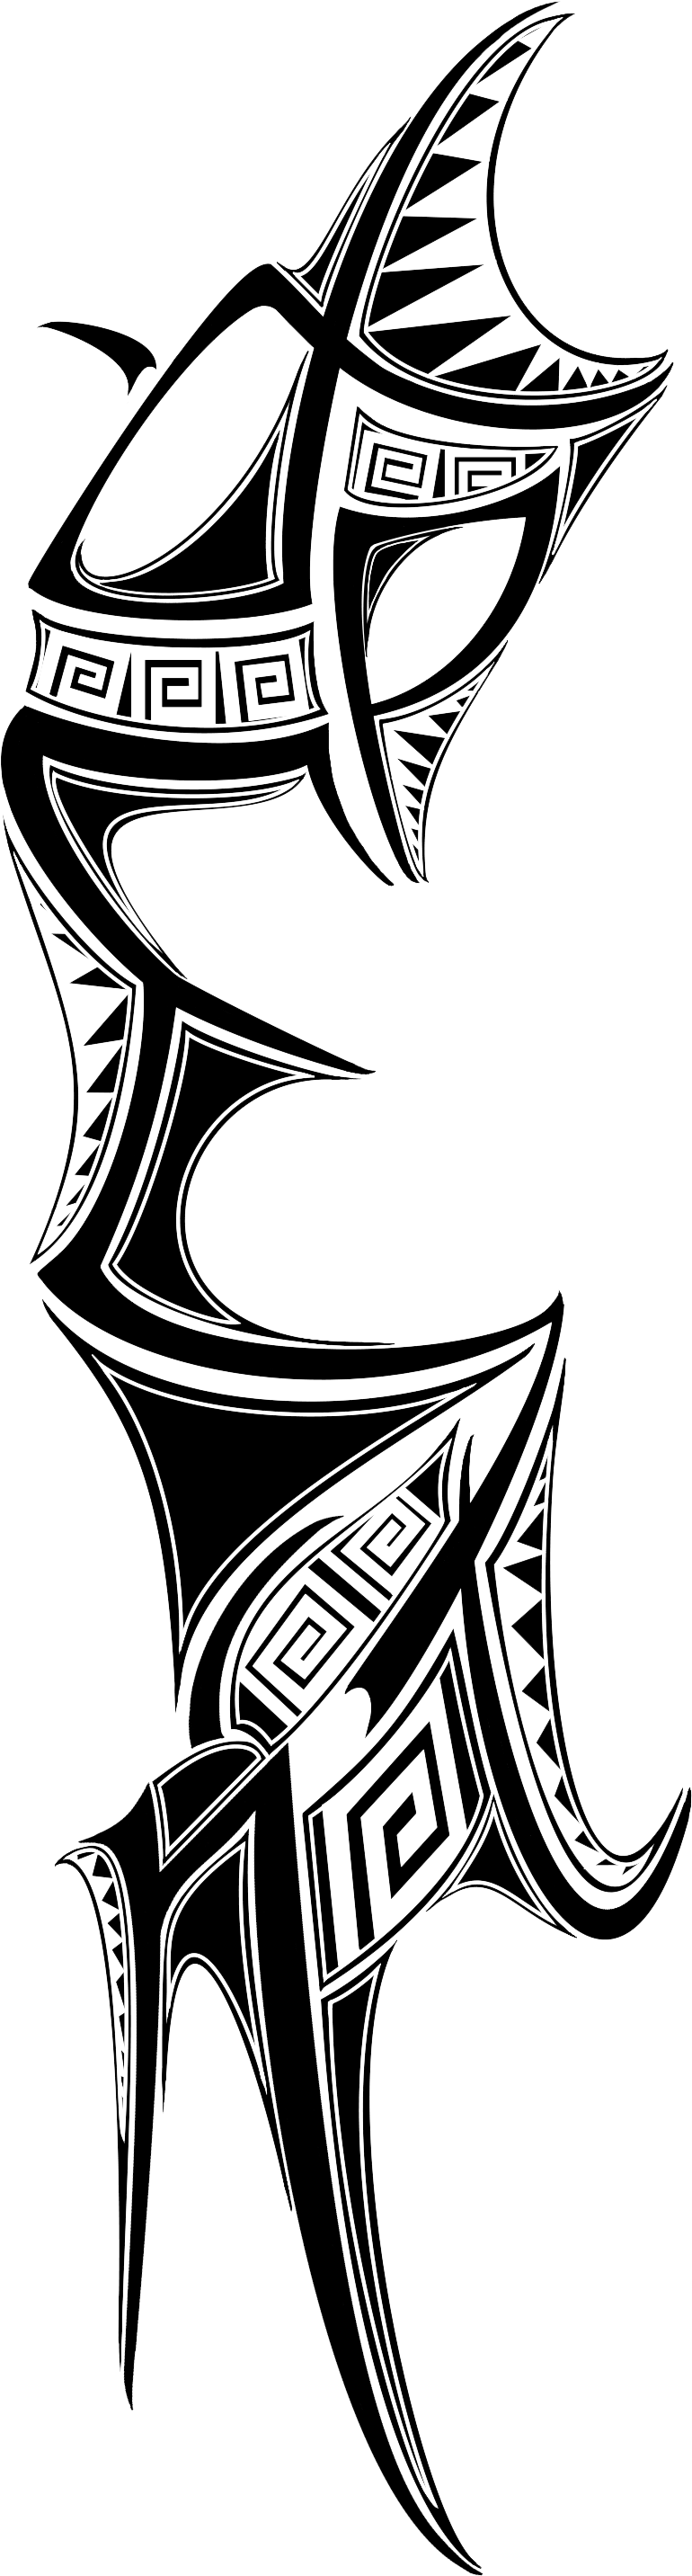 Arm Tattoo PNG Image